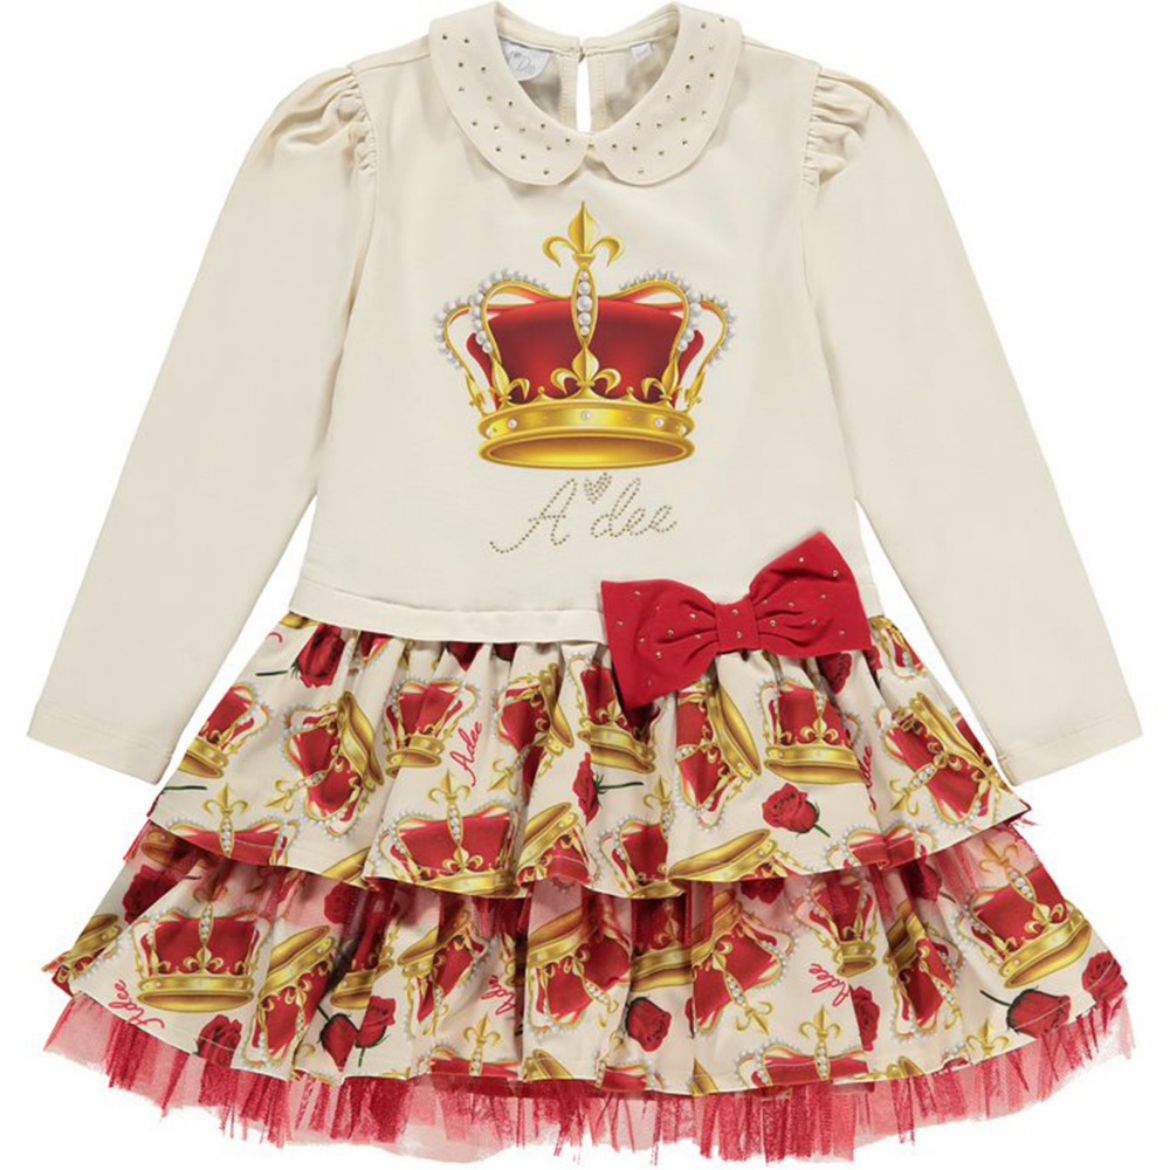 Picture of A Dee Girls 'Clara' White Crown Frill Dress